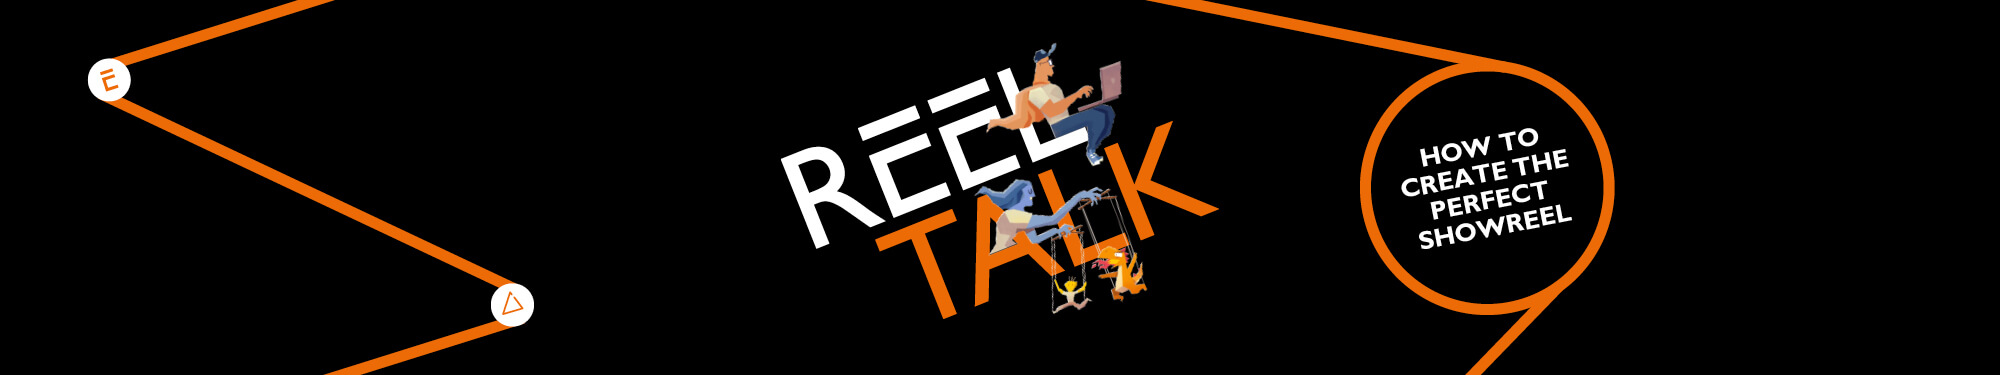 REEL Talk graphic with avatars on black background